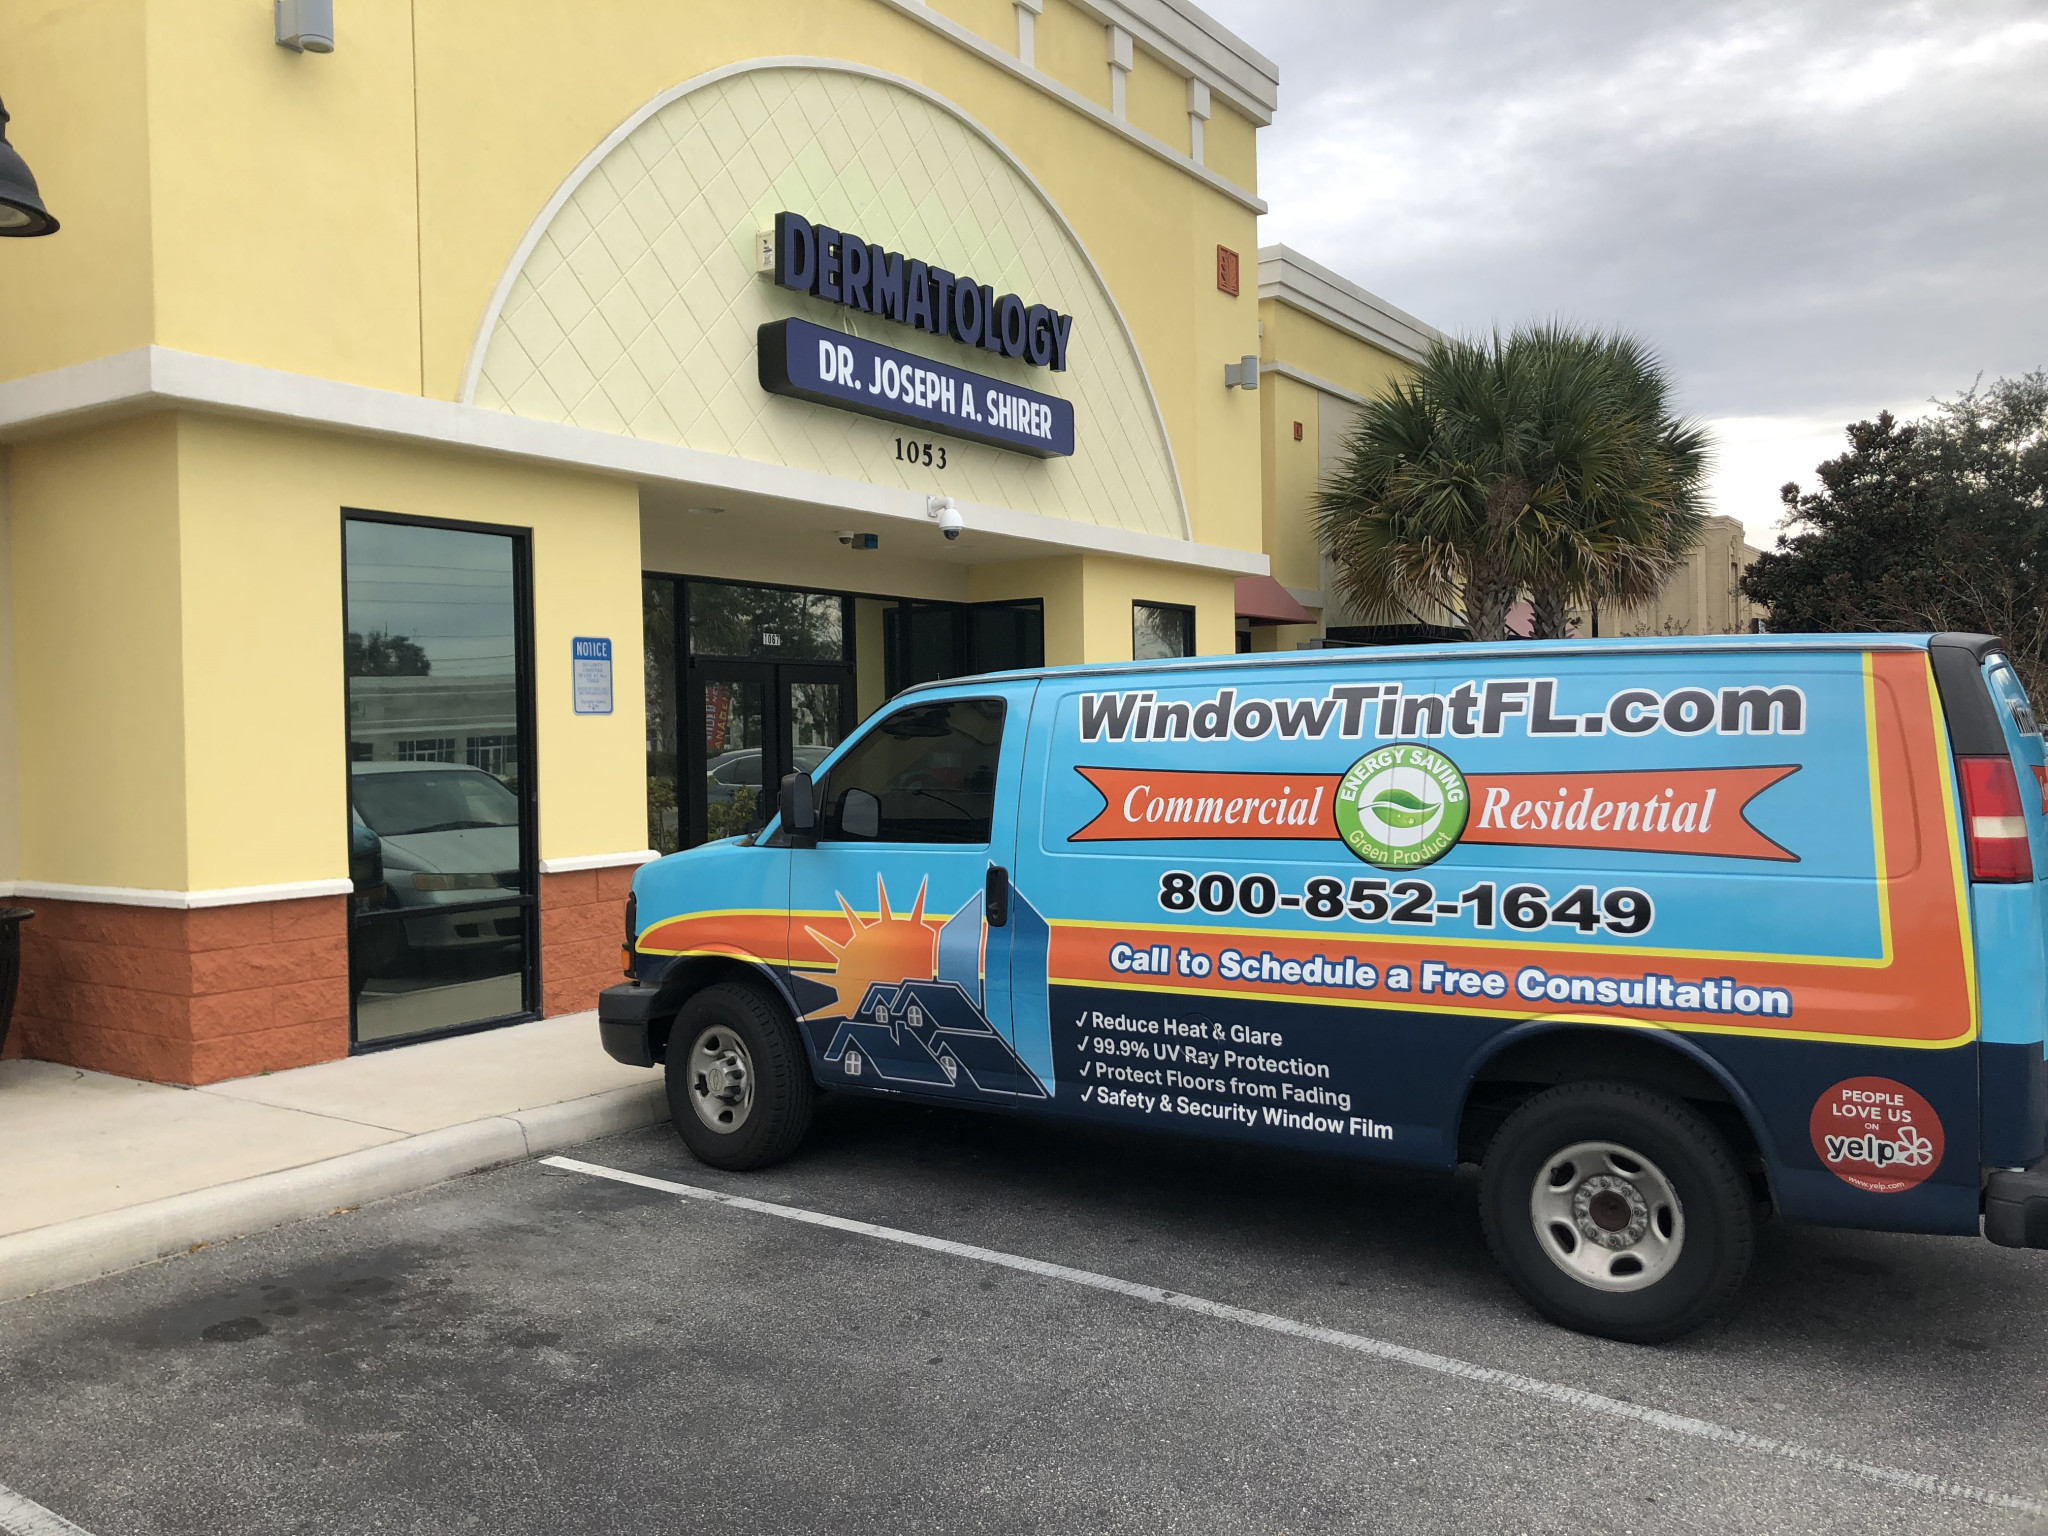 Mirror Tint for Privacy in Orlando